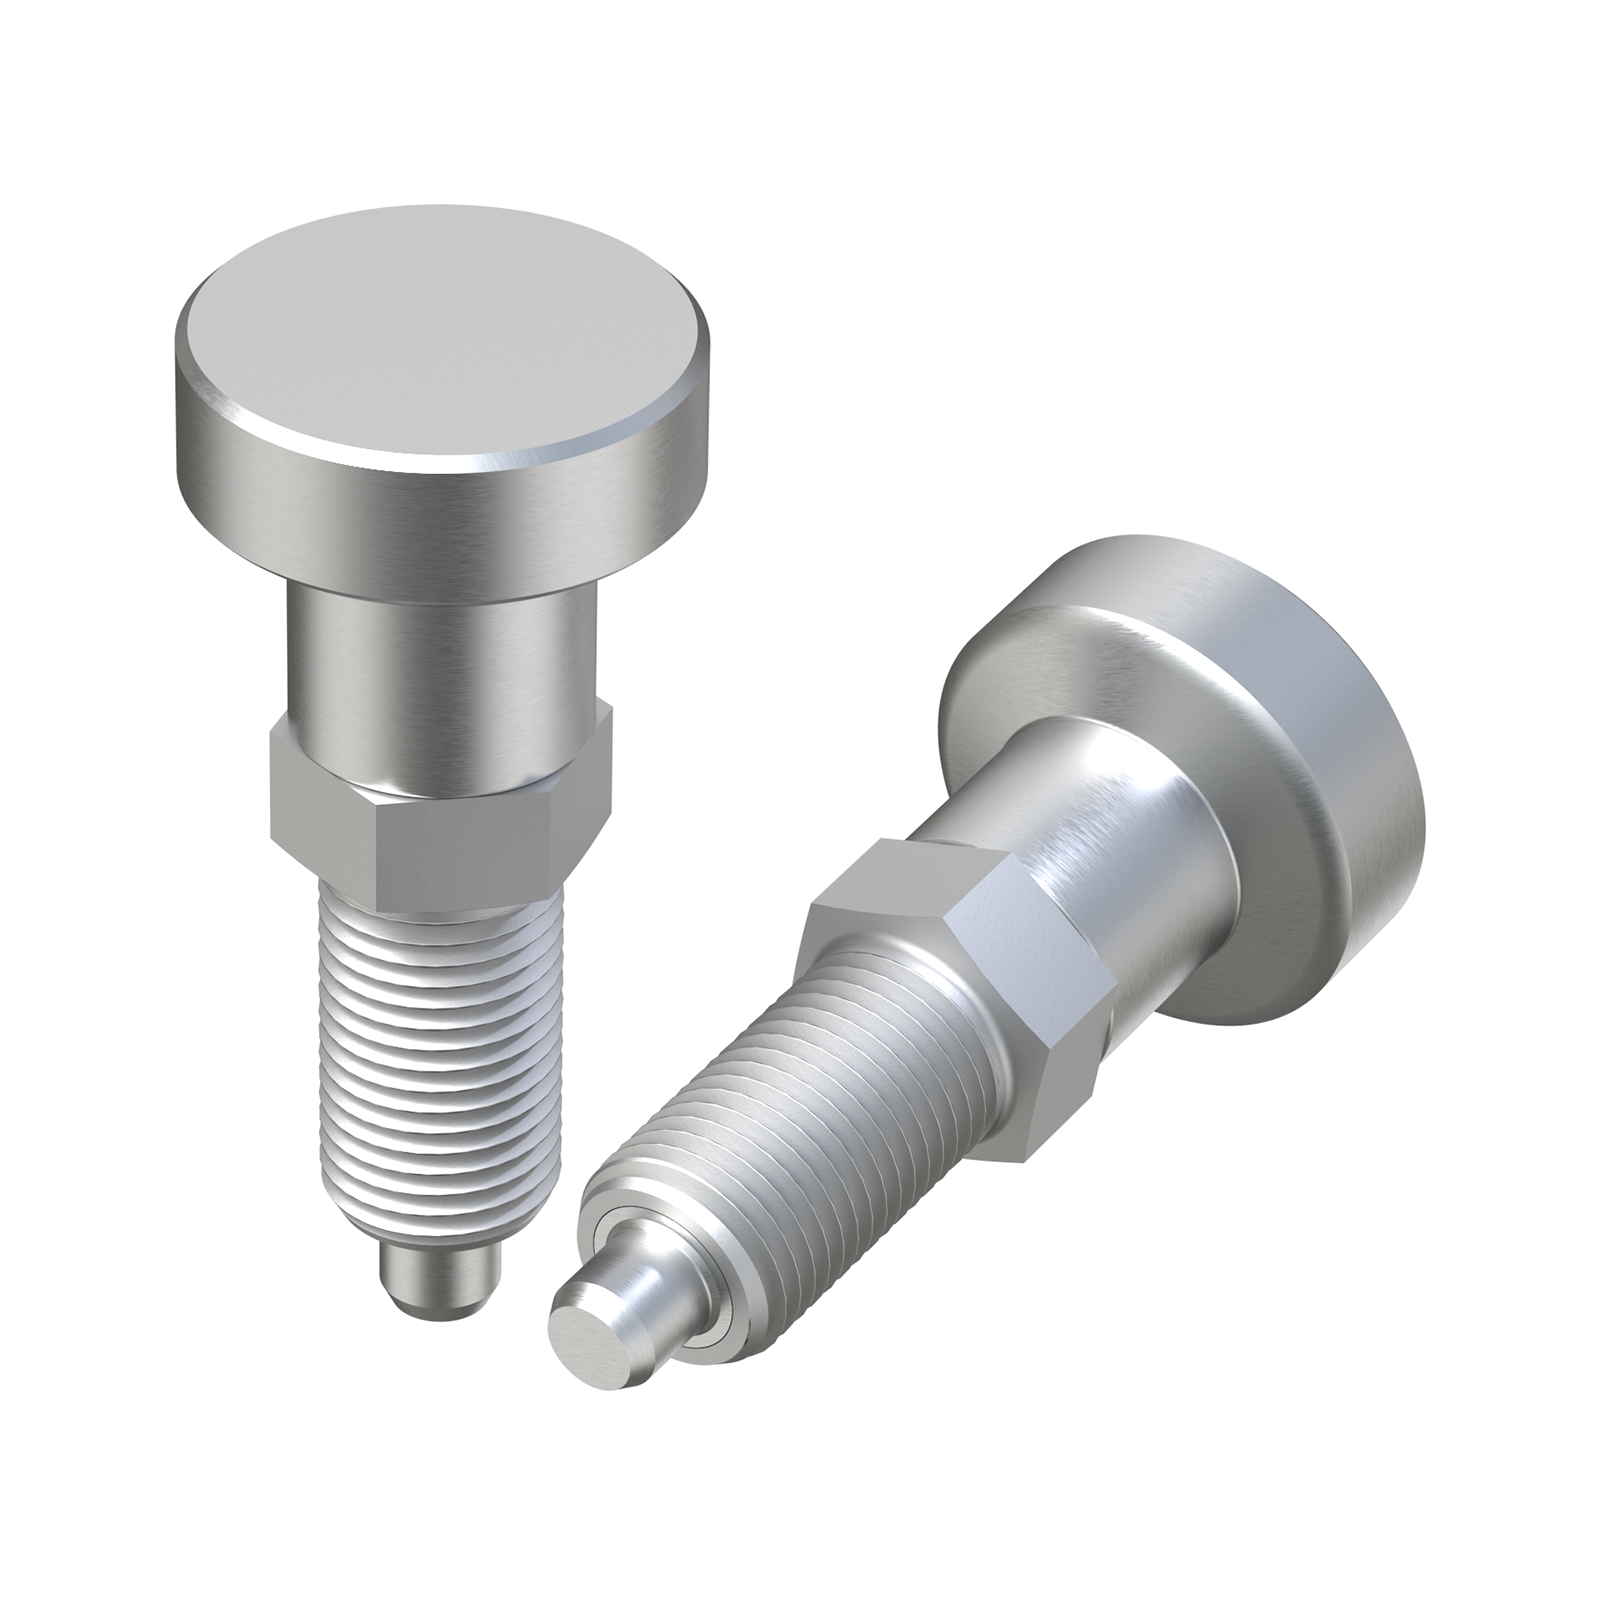 Index bolt with metal cylindrical head no stop